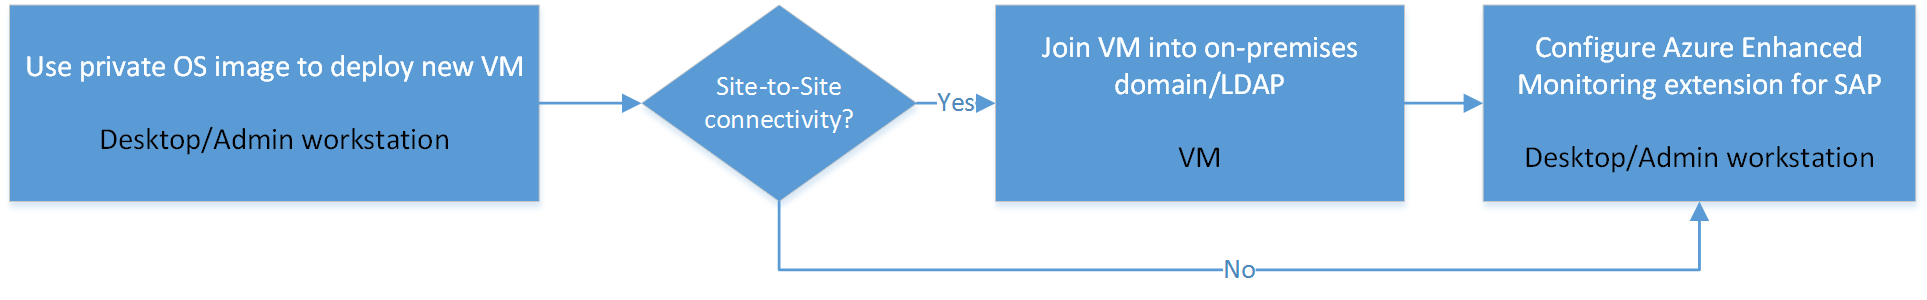 Flowchart of VM deployment for SAP systems by using a VM image in private Marketplace